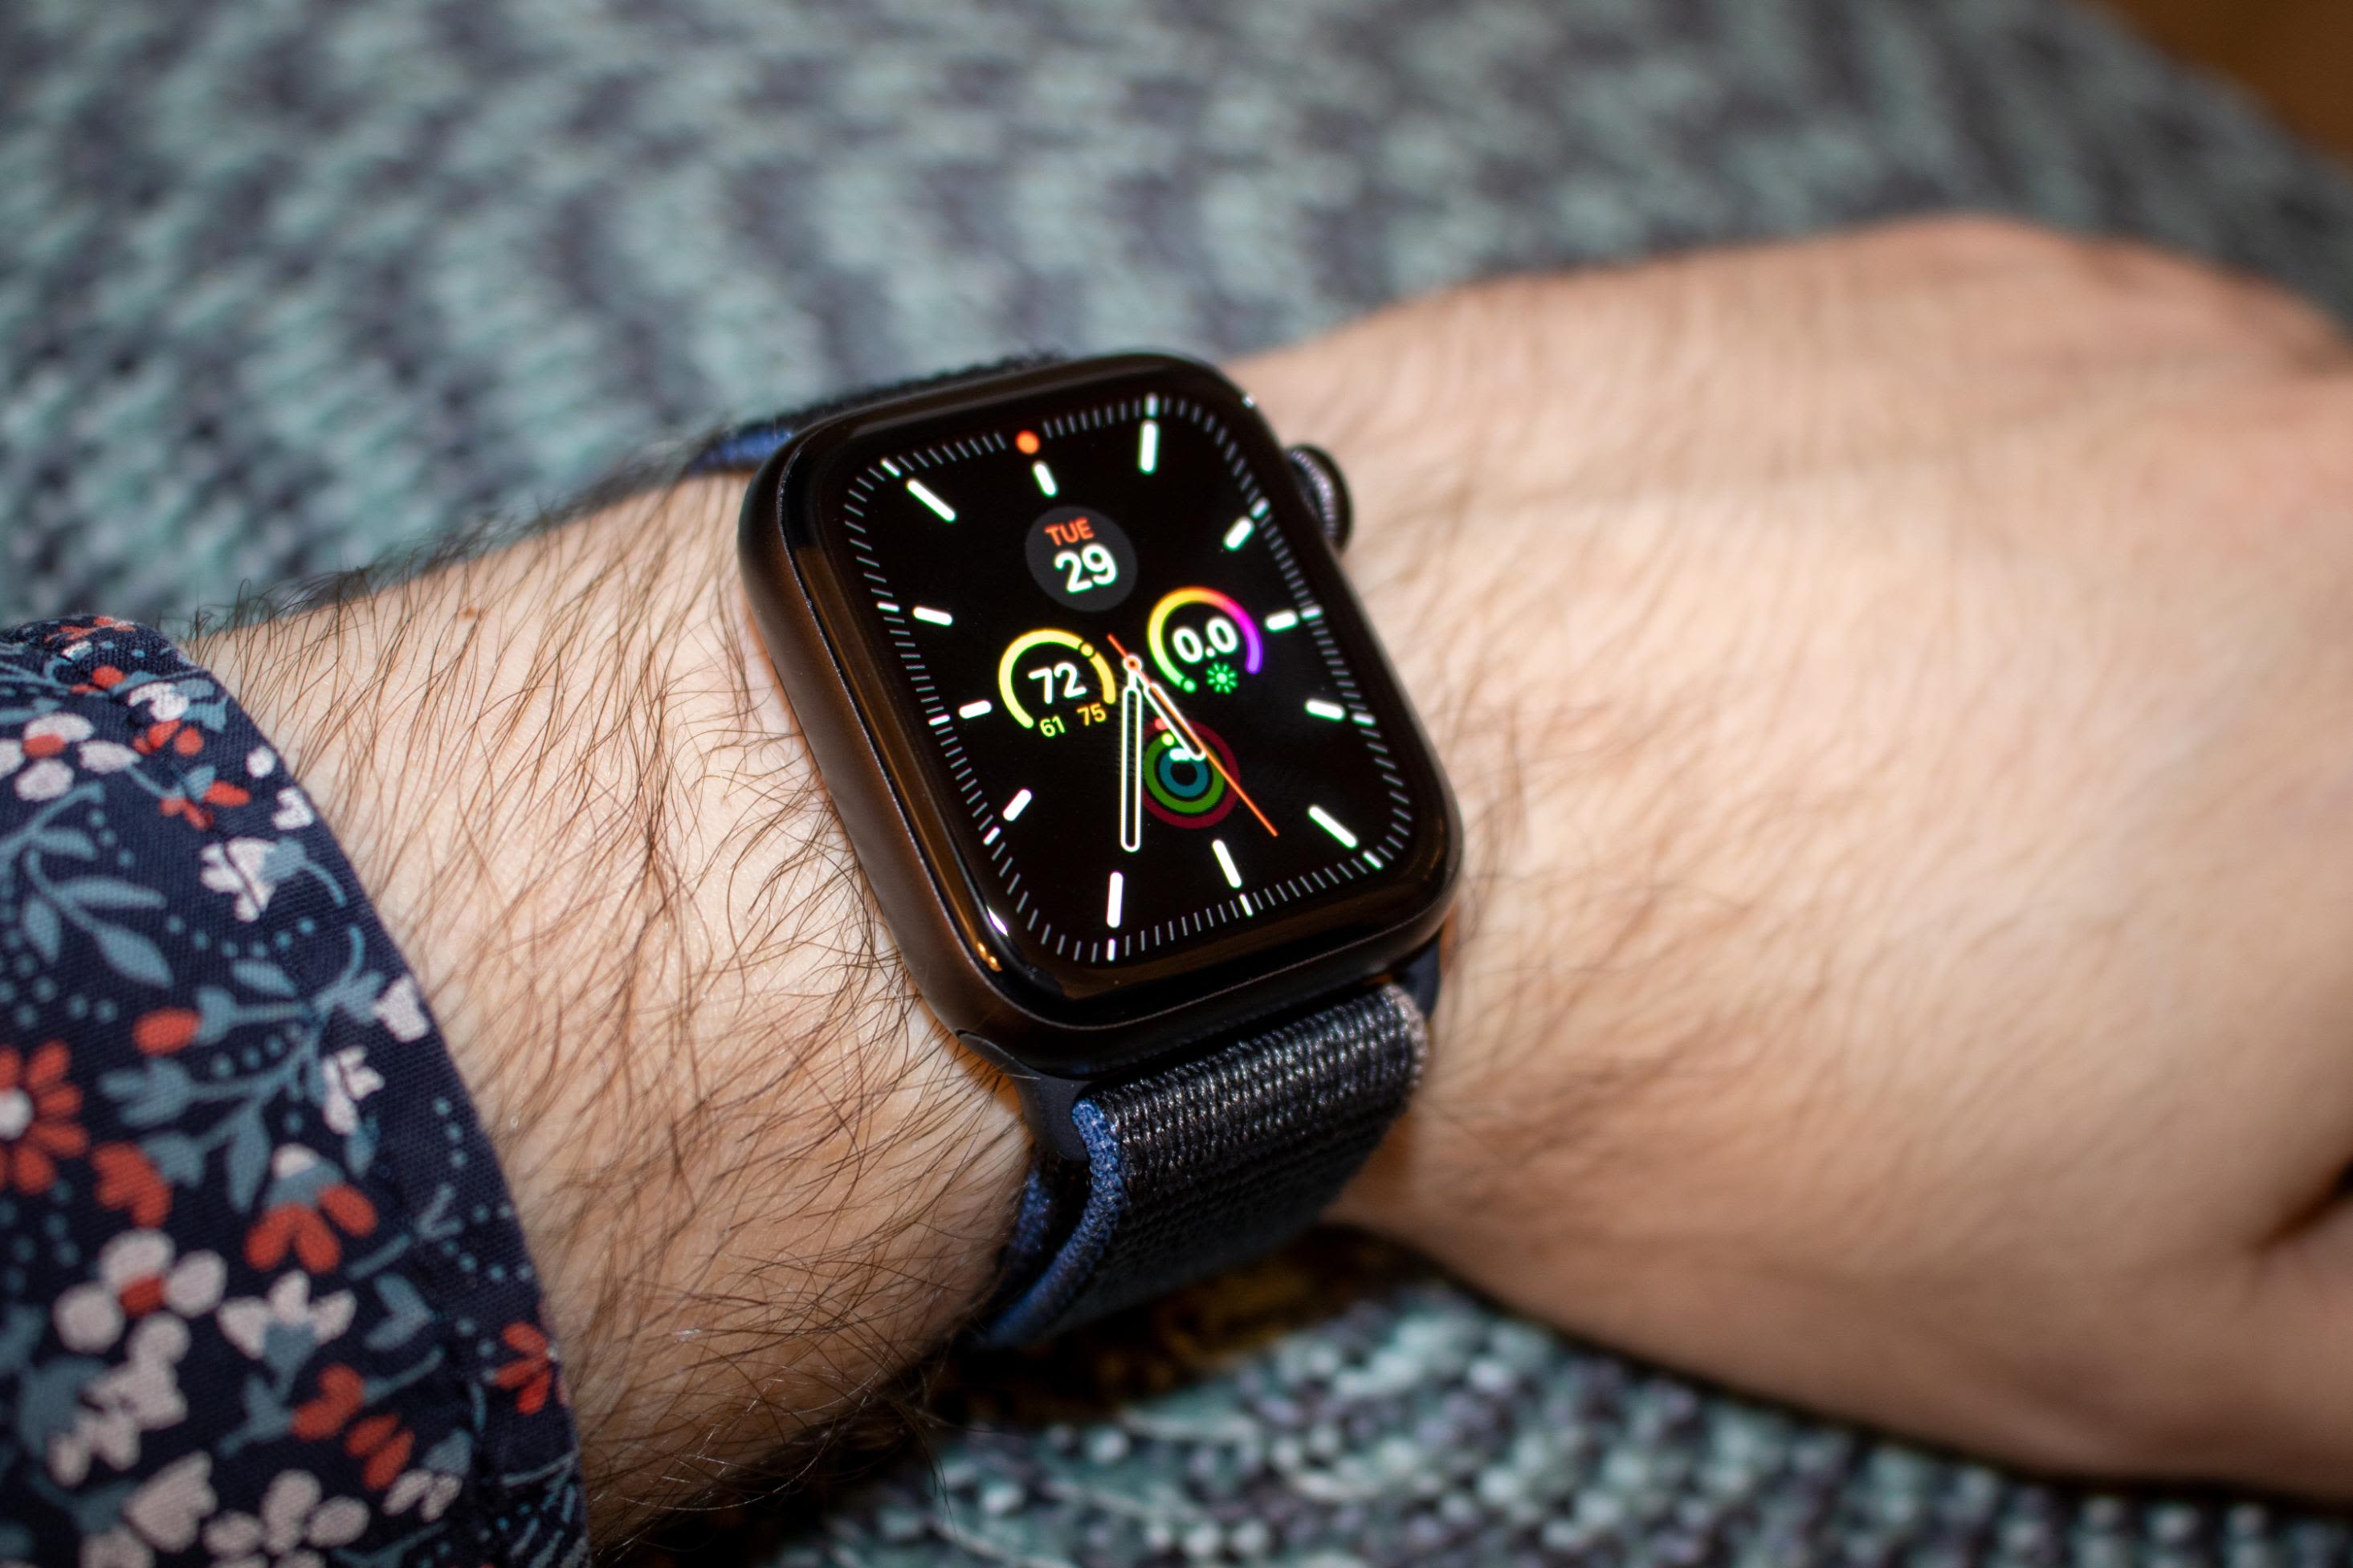 Apple Watch Se Review: Entry-Level & Feature Filled | Cnn Underscored